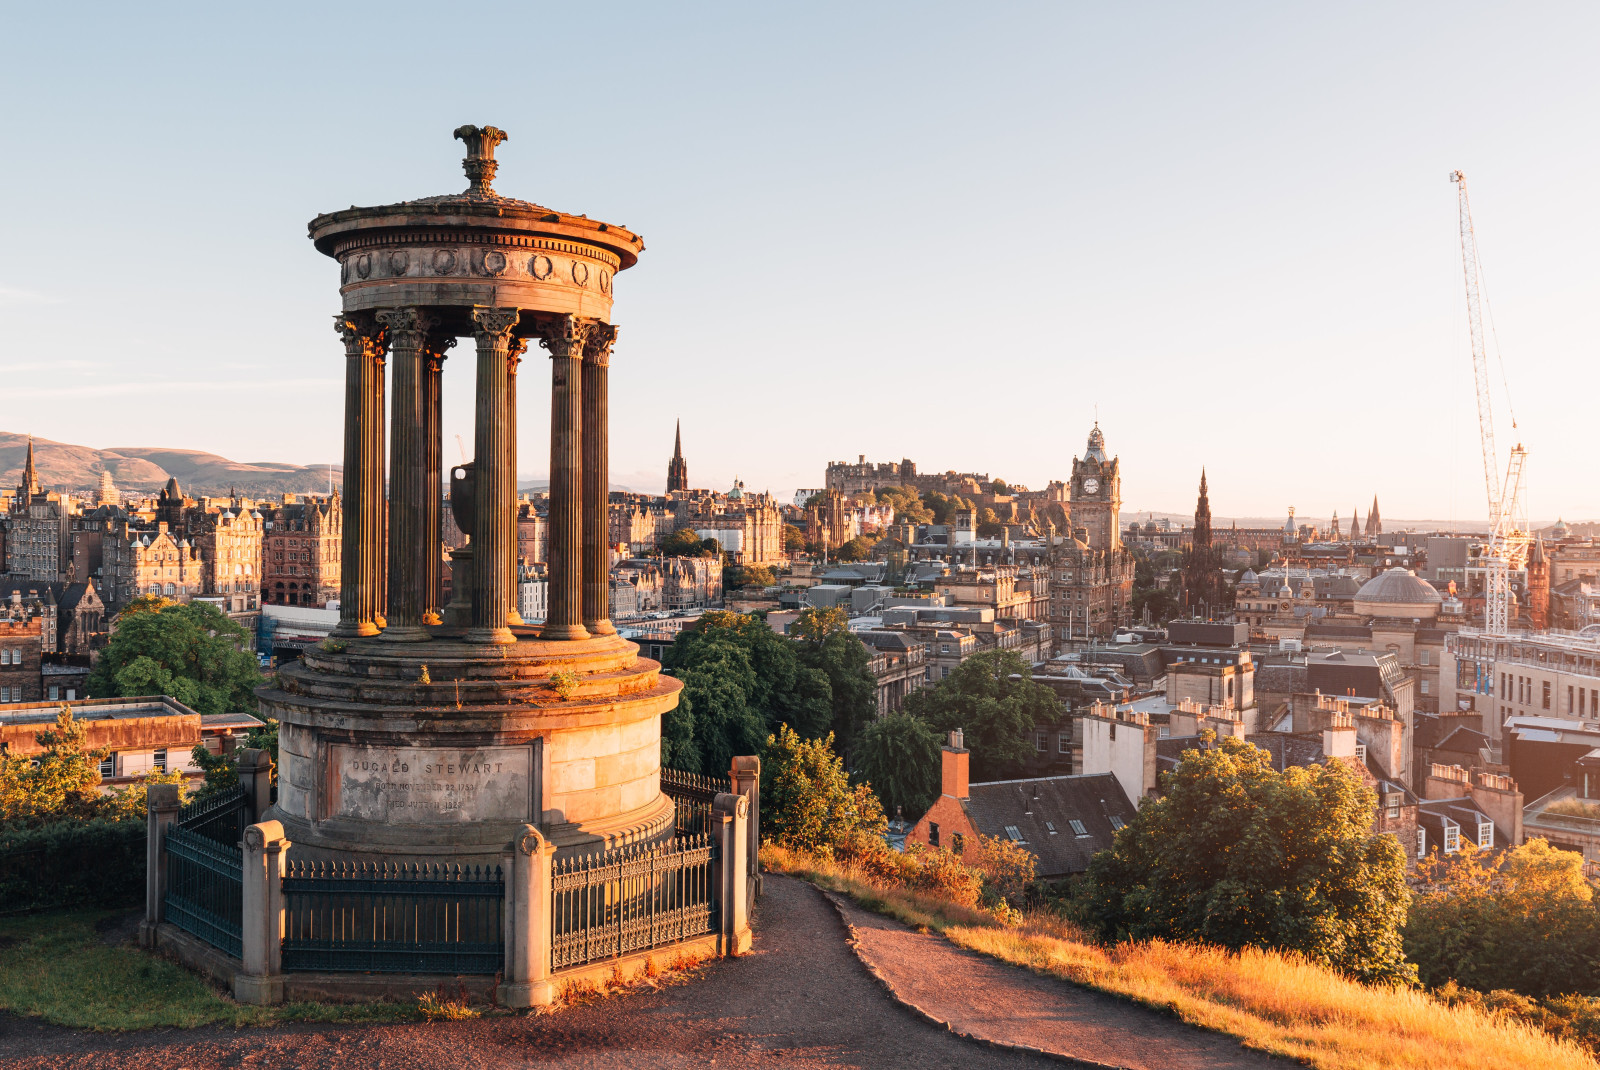 Travel Scotland to see old town Edinburgh overlooking the city with numerous ancient brown buildings, a tall white crane, and a brown, pillared monument at sunset. 